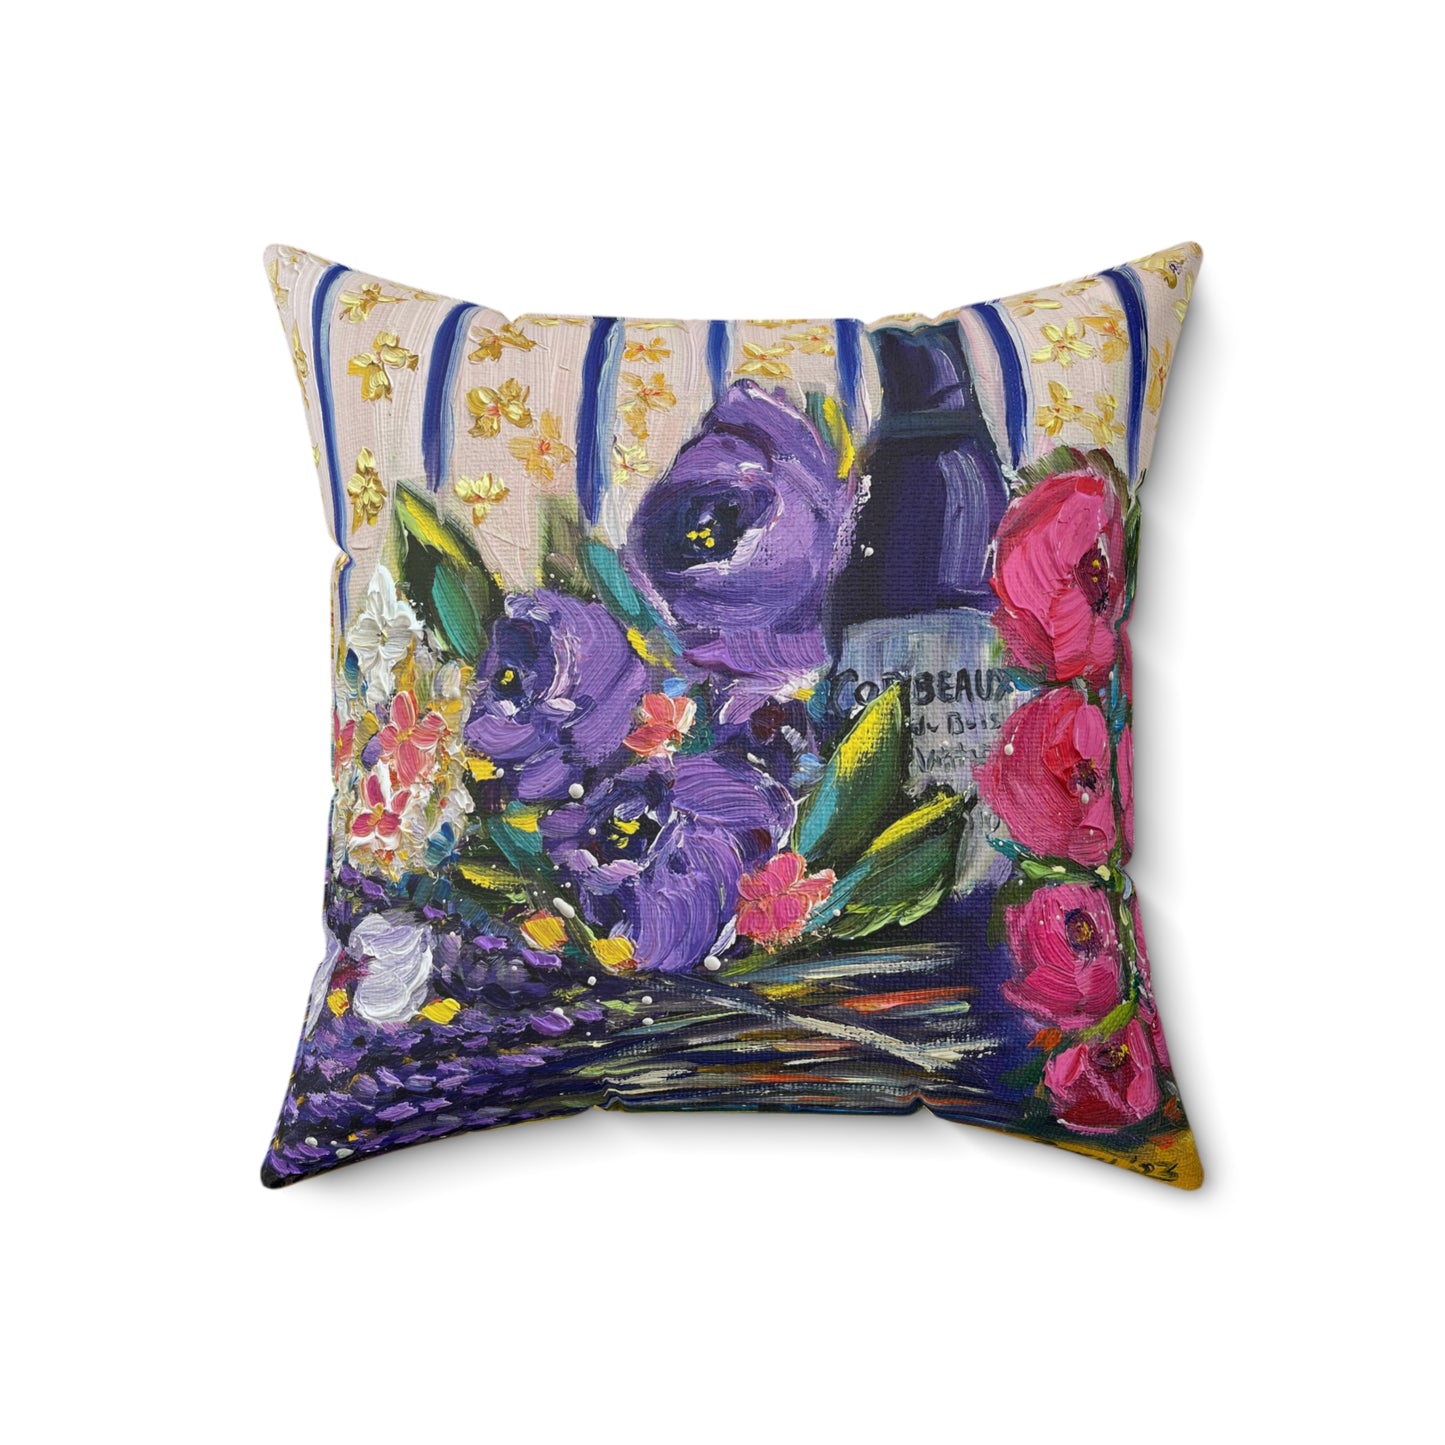 Wine and Lavender- Indoor Spun Polyester Square Pillow